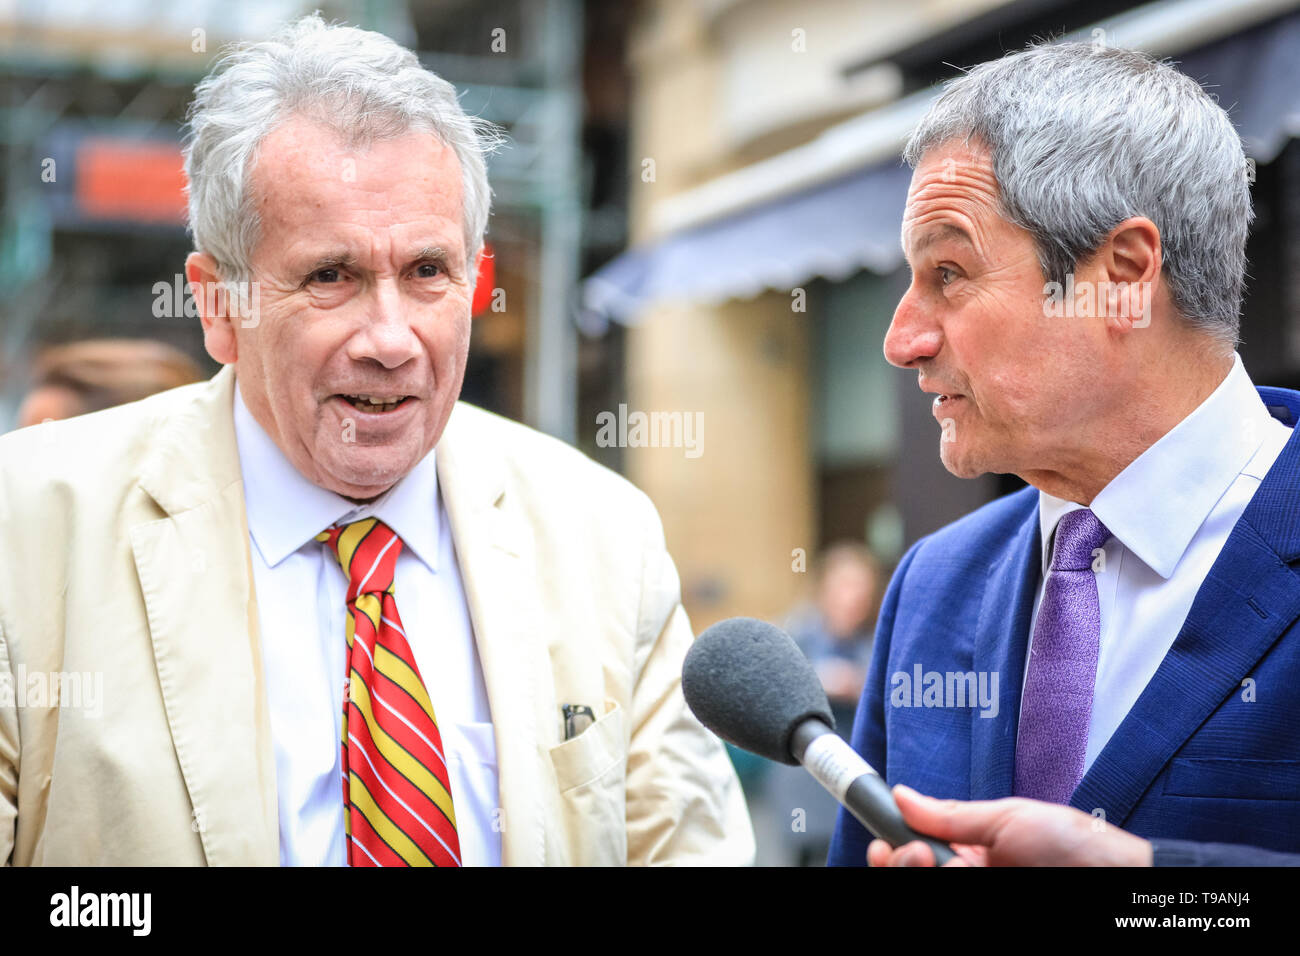 London, UK, 17th May 2019. Martin Bell (left) and Gavin Esler (right). Change UK (formerly the Independent Group) campaign in Argyll Street near Oxford Circus in Central London, as part of their European Elections efforts. Chuka Umunna MP, former war correspondent and independent MP Martin Bell, Change UK MEP candidate Gavin Esler, and Change UK MEP candidates for London hand out leaflets and chat to the public as part of the EU Election campaign. Credit: Imageplotter/Alamy Live News Stock Photo